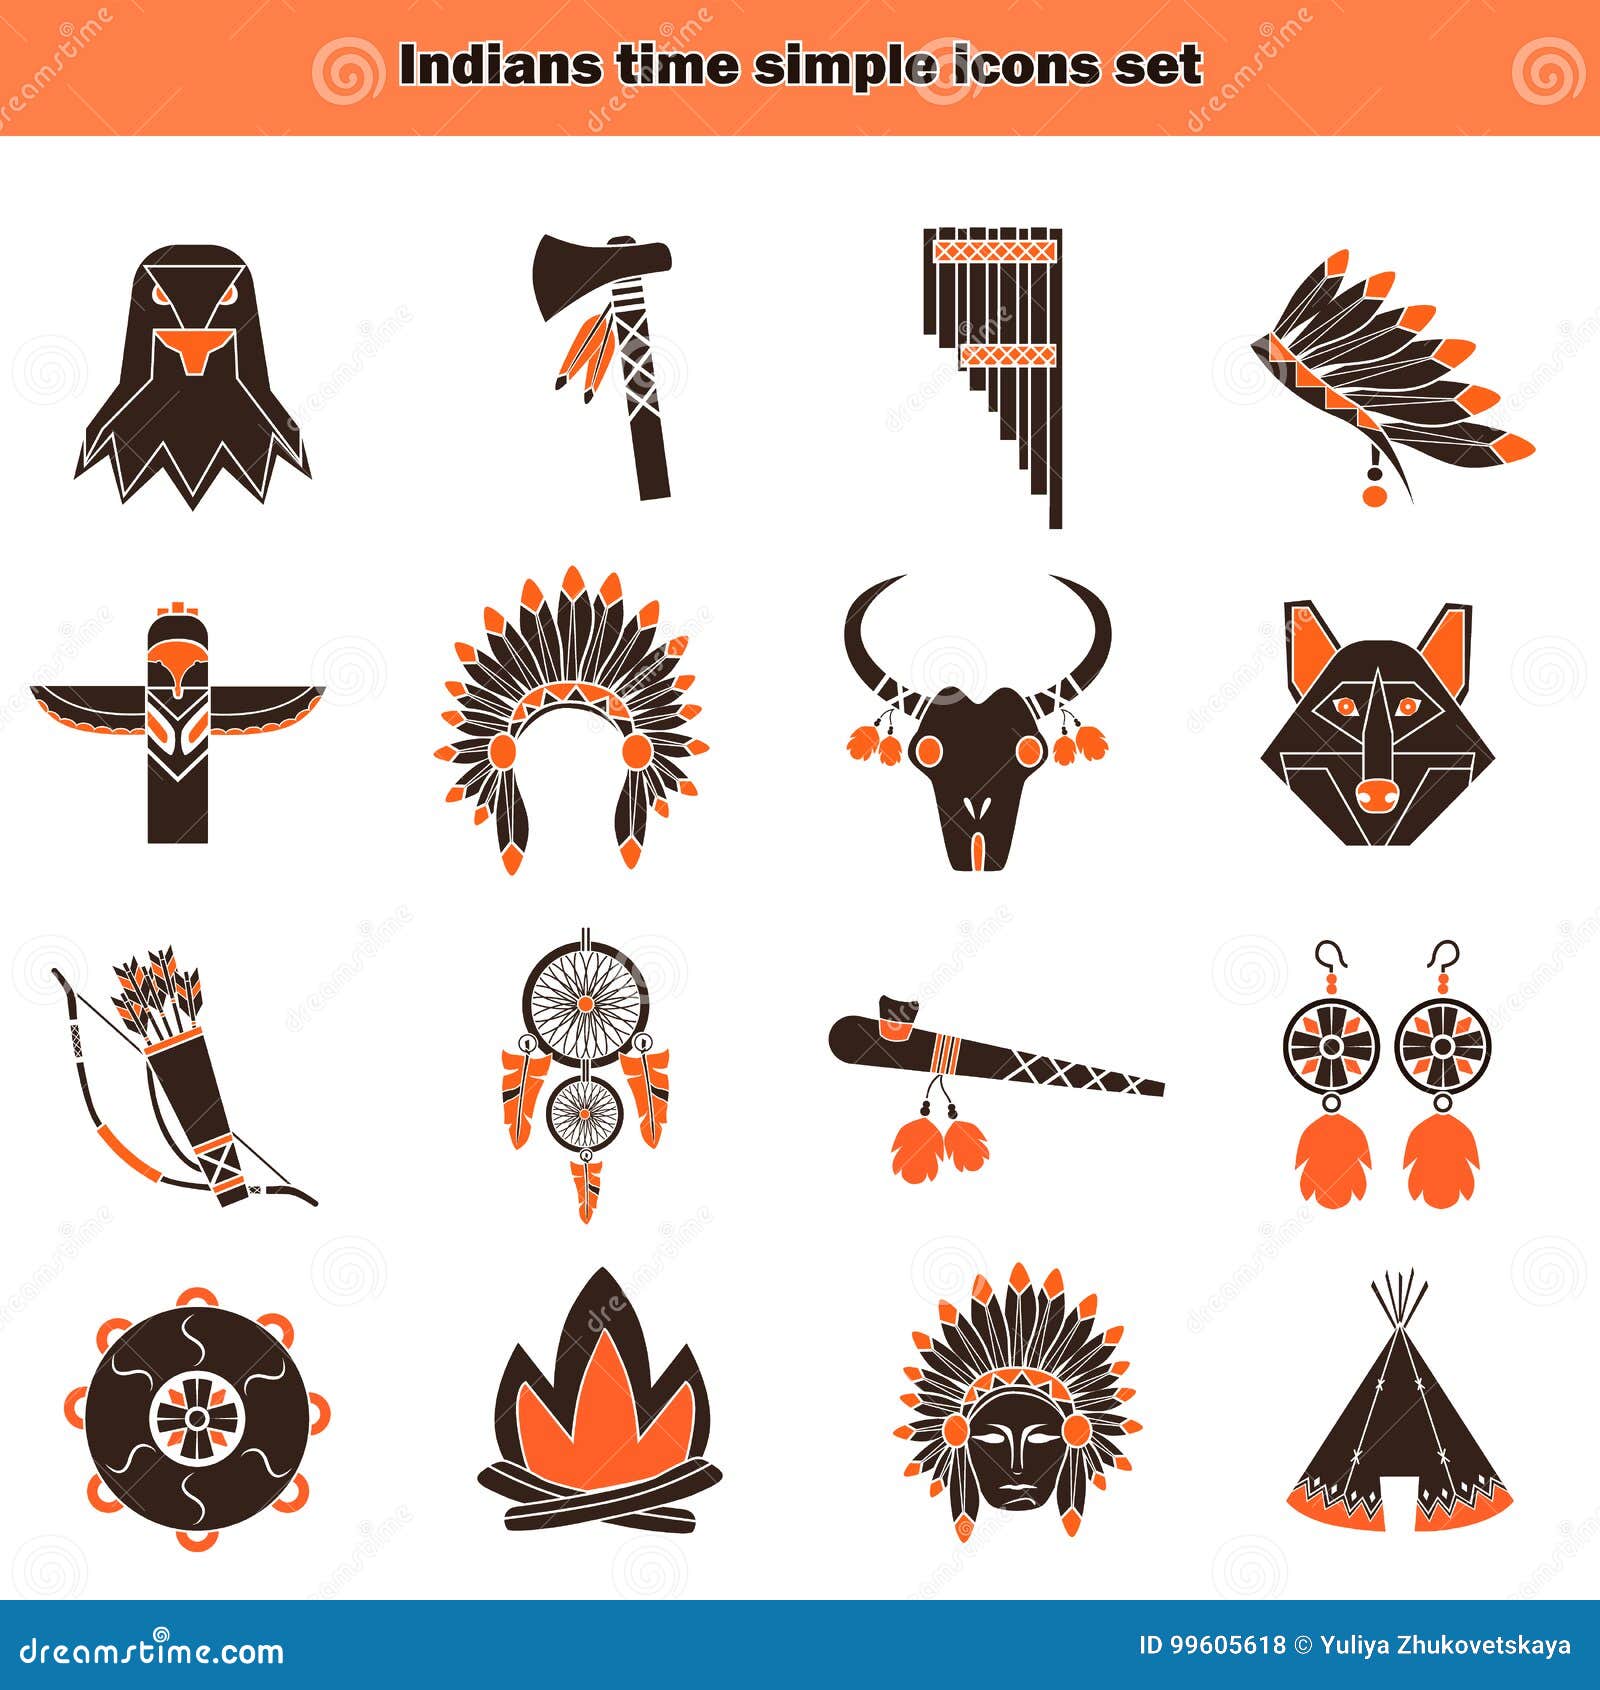 indians time simple icons set